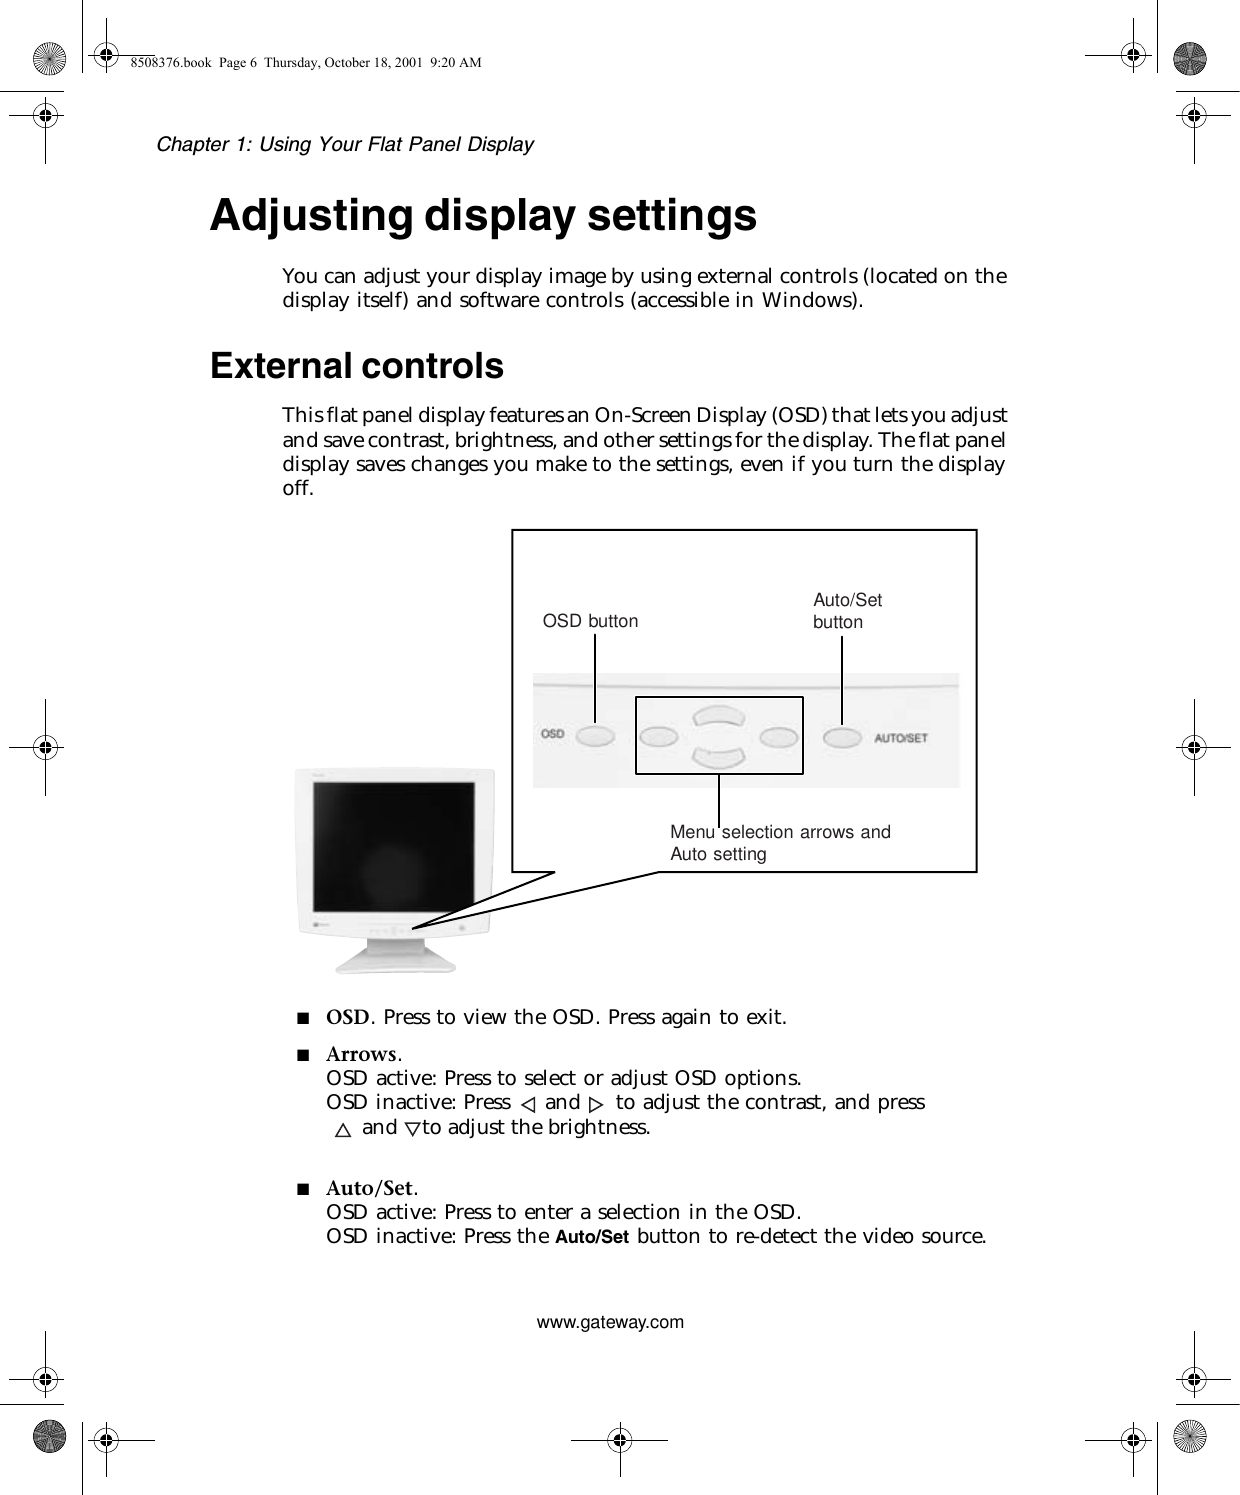 Chapter 1: Using Your Flat Panel Displaywww.gateway.comAdjusting display settingsYou can adjust your display image by using external controls (located on the display itself) and software controls (accessible in Windows).External controlsThis flat panel display features an On-Screen Display (OSD) that lets you adjust and save contrast, brightness, and other settings for the display. The flat panel display saves changes you make to the settings, even if you turn the display off.■OSD. Press to view the OSD. Press again to exit.■Arrows.OSD active: Press to select or adjust OSD options.OSD inactive: Press and to adjust the contrast, and press      and    to adjust the brightness.■Auto/Set.OSD active: Press to enter a selection in the OSD.OSD inactive: Press the Auto/Set button to re-detect the video source.8508376.book  Page 6  Thursday, October 18, 2001  9:20 AMAuto settingMenu selection arrows andOSD button Auto/Setbutton